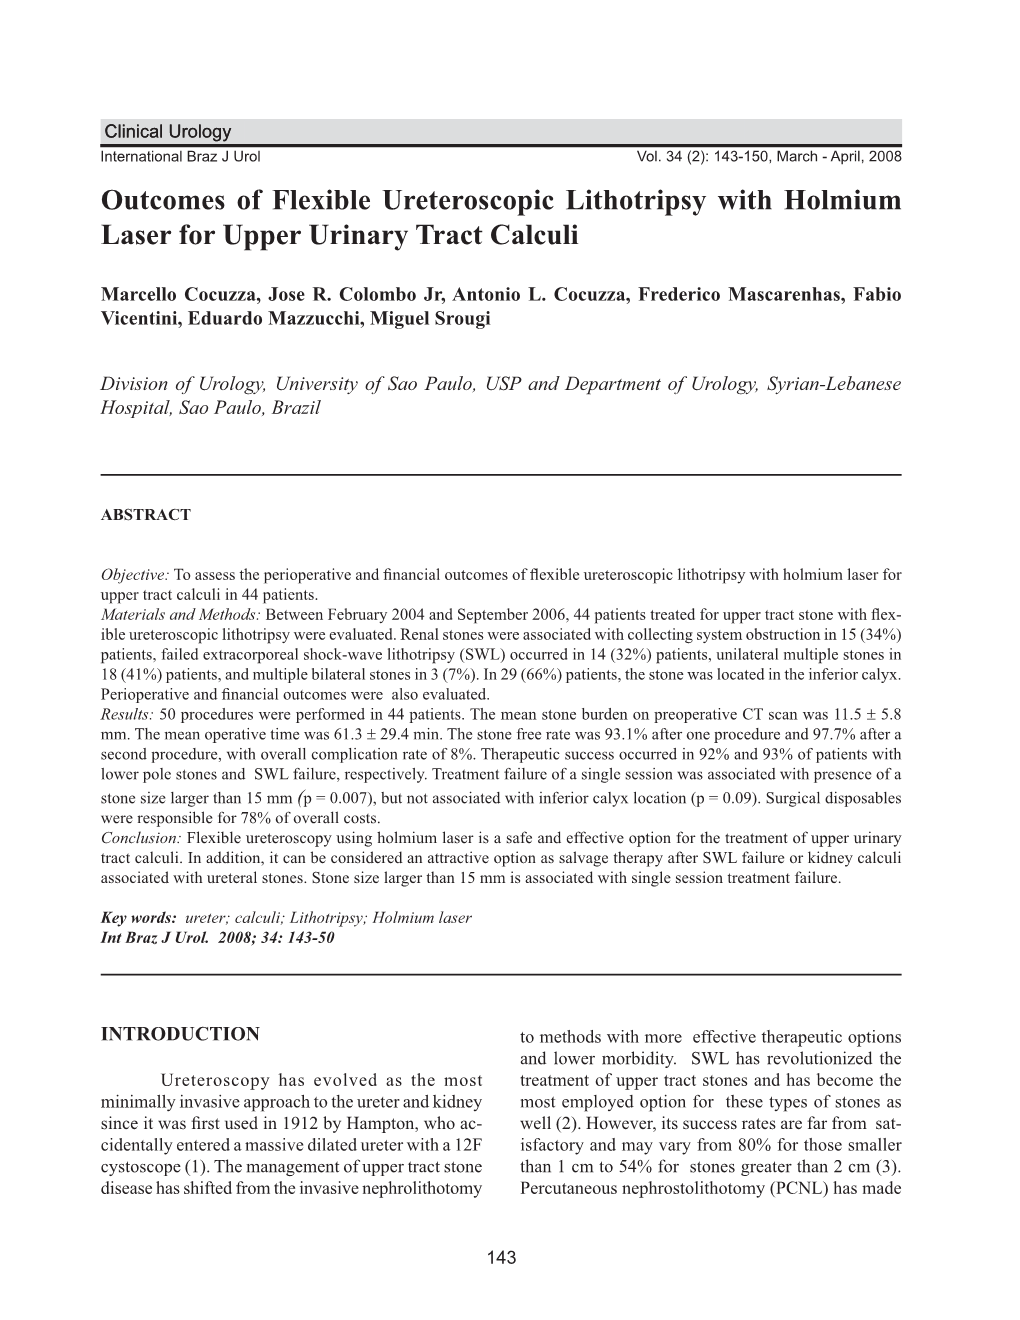 Outcomes of Flexible Ureteroscopic Lithotripsy with Holmium Laser for Upper Urinary Tract Calculi